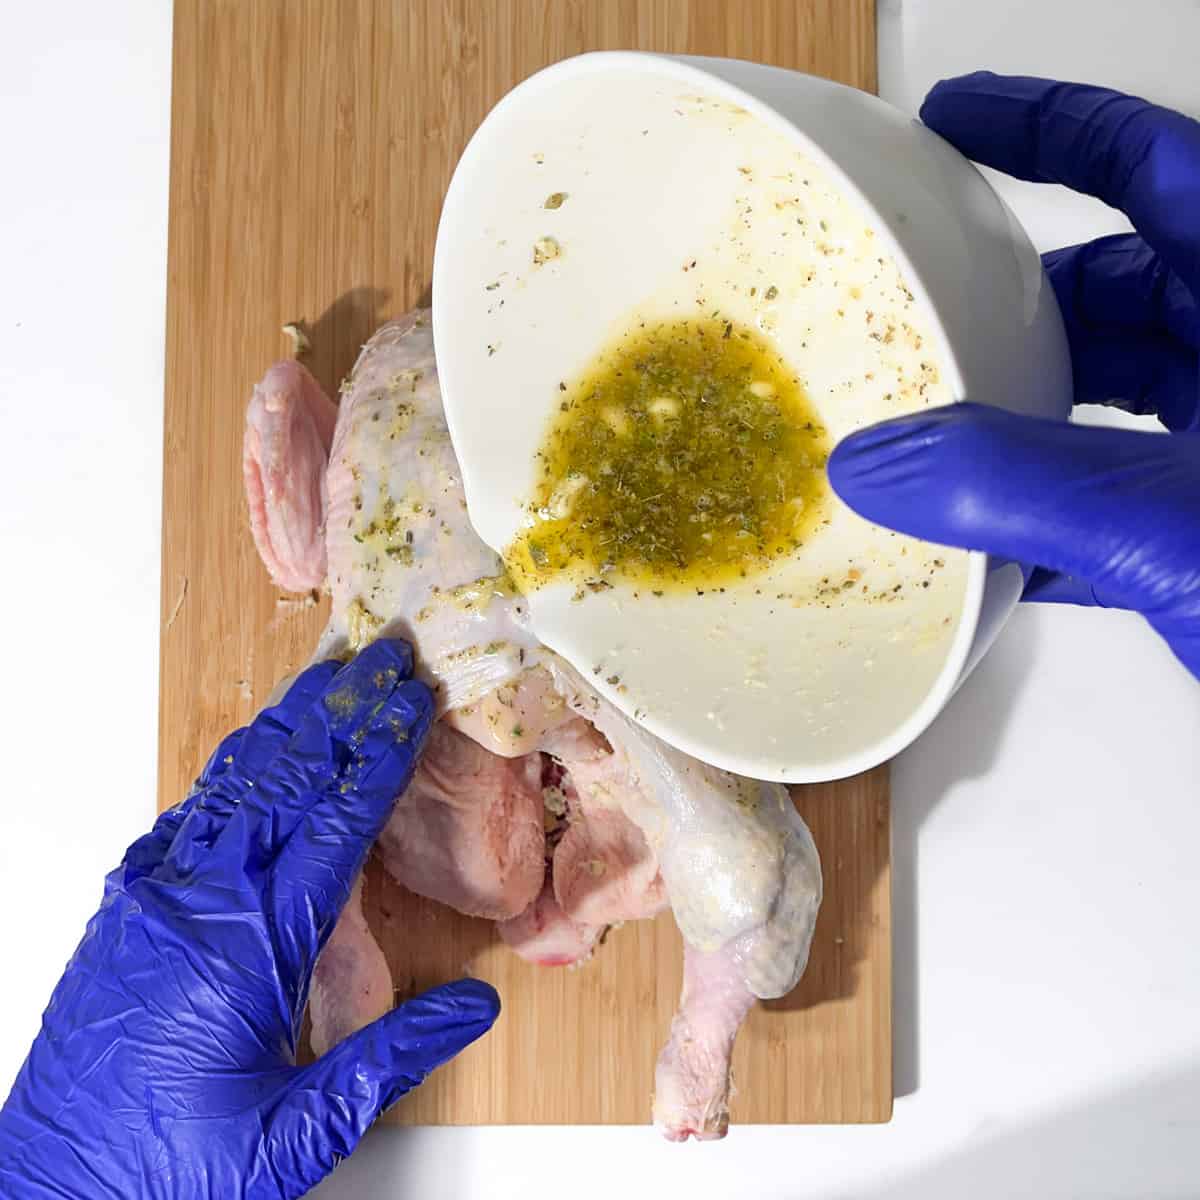 Pouring melted compound butter over the chicken.